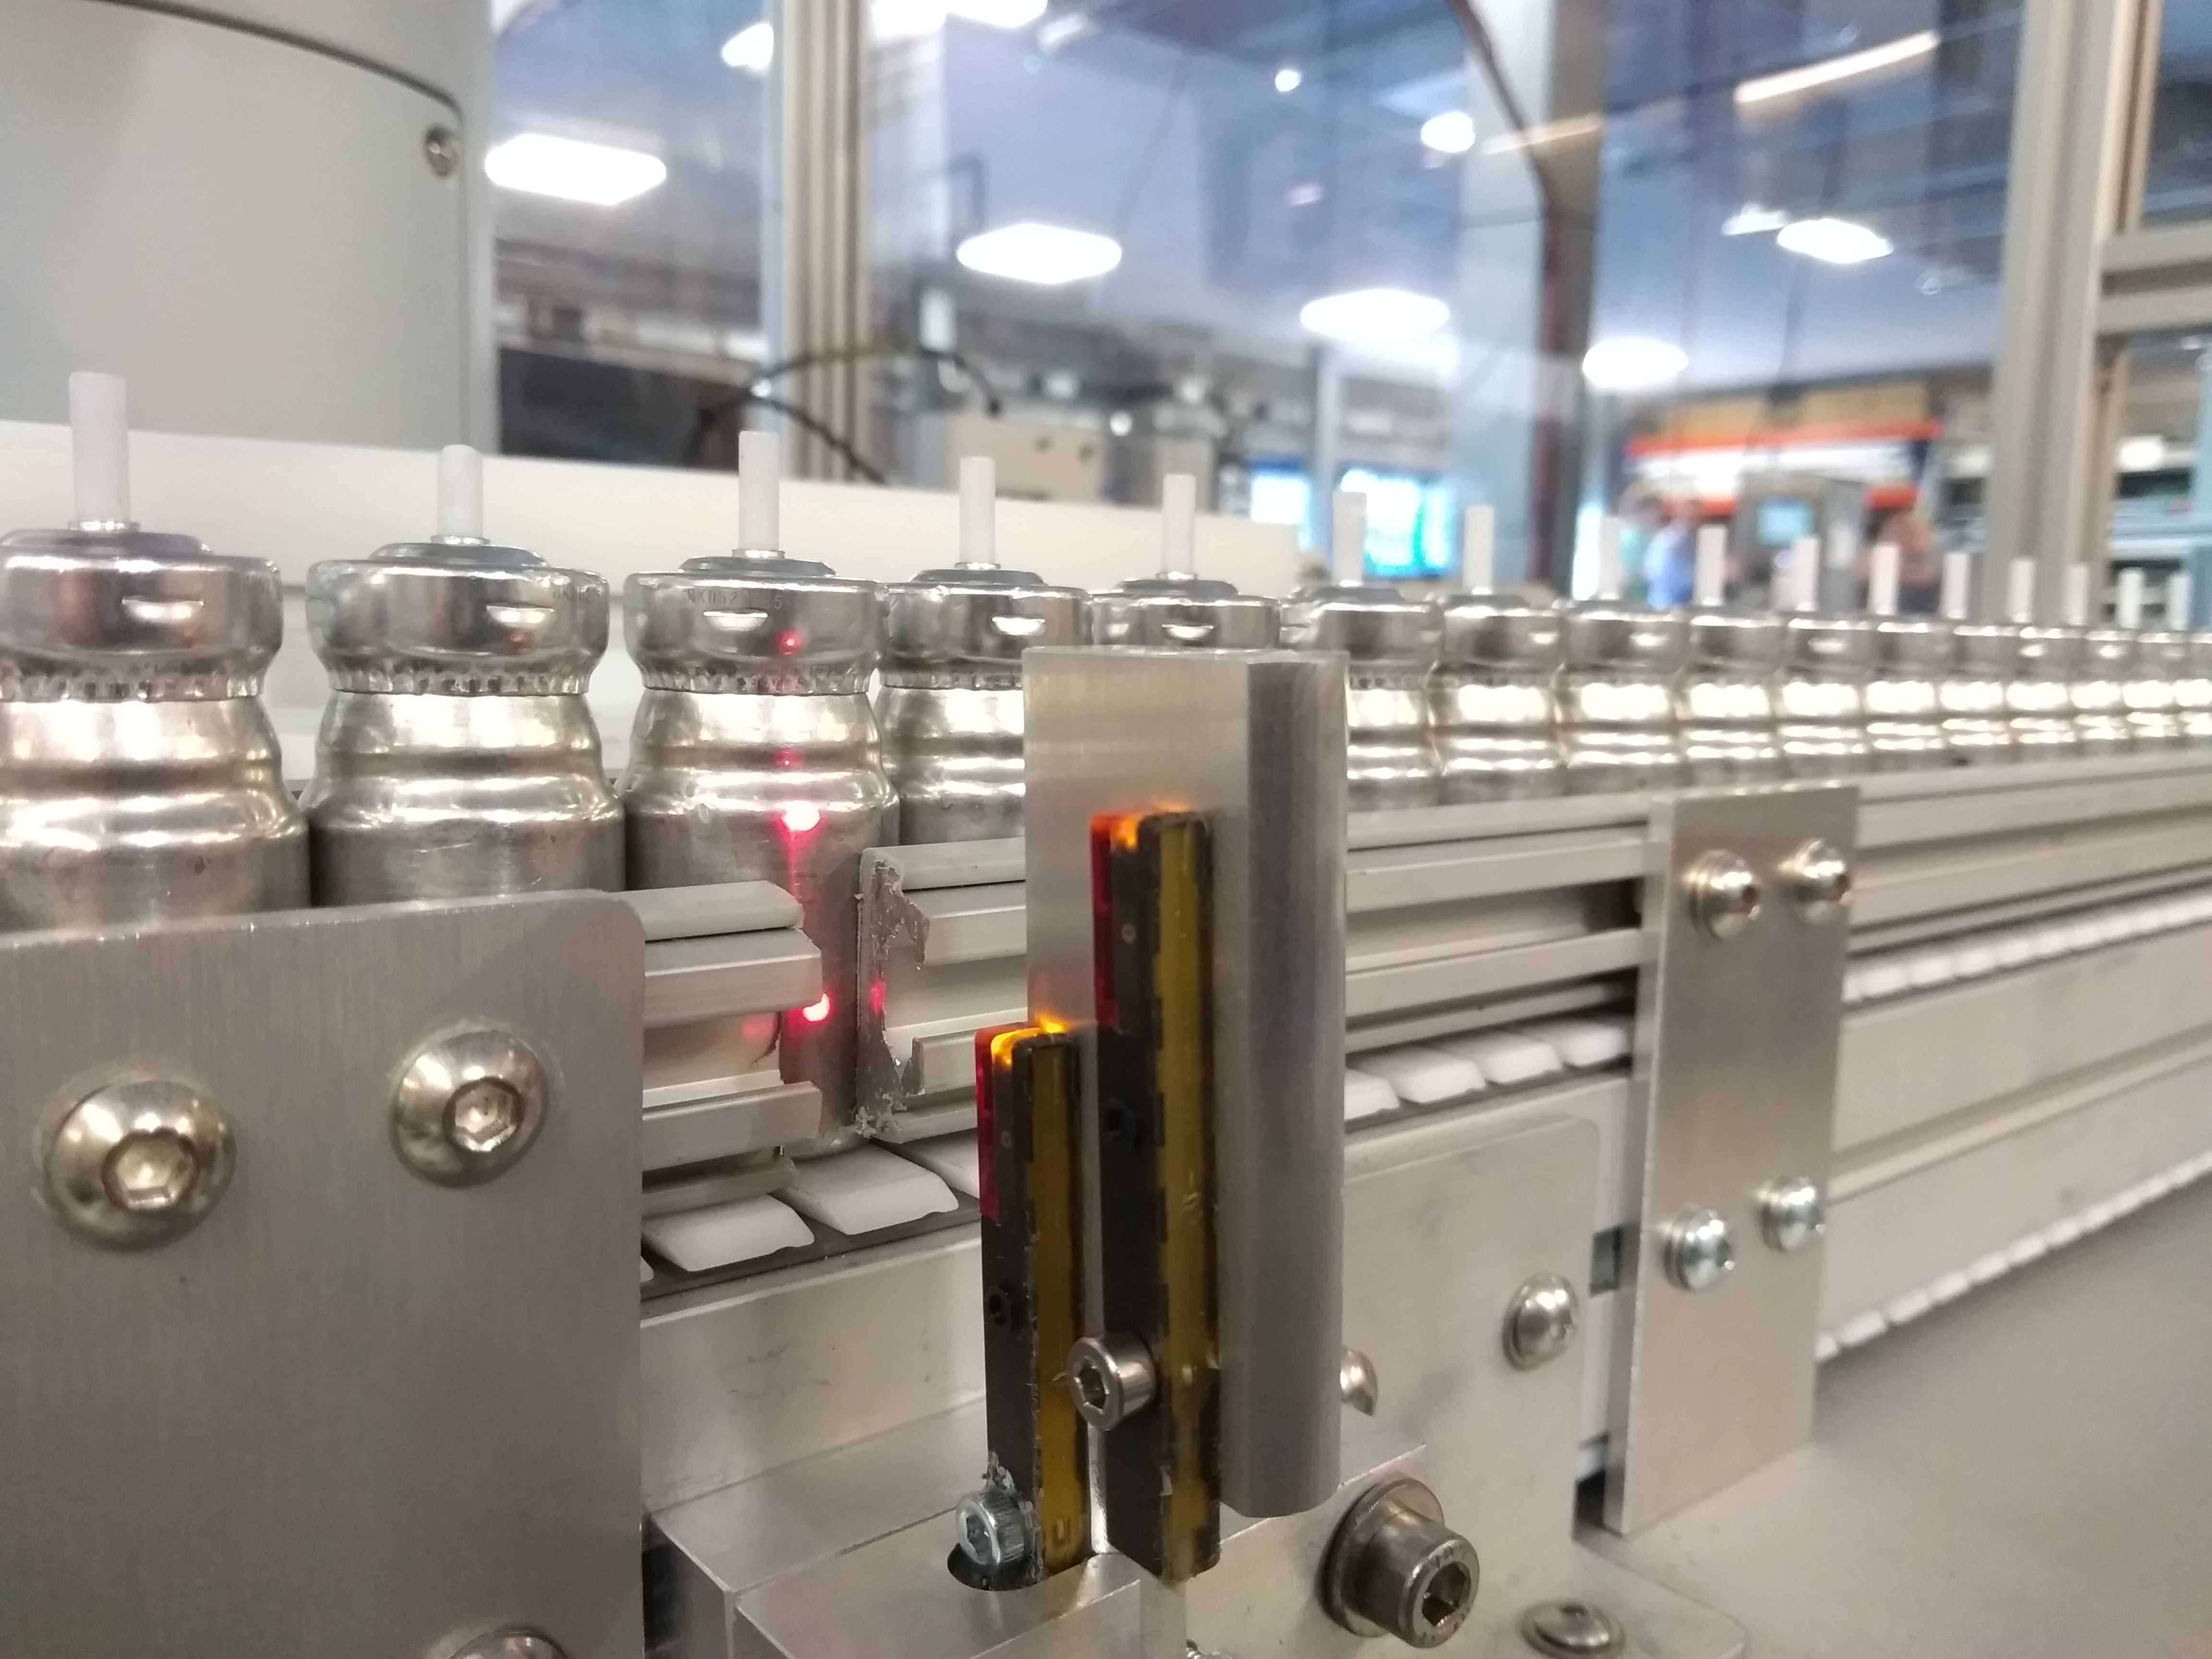 Suitable system integration providers for pharmaceutical manufacturers should leverage Quality by Design (QbD) approaches as well as deliver solutions that meet regulatory compliance requirements.